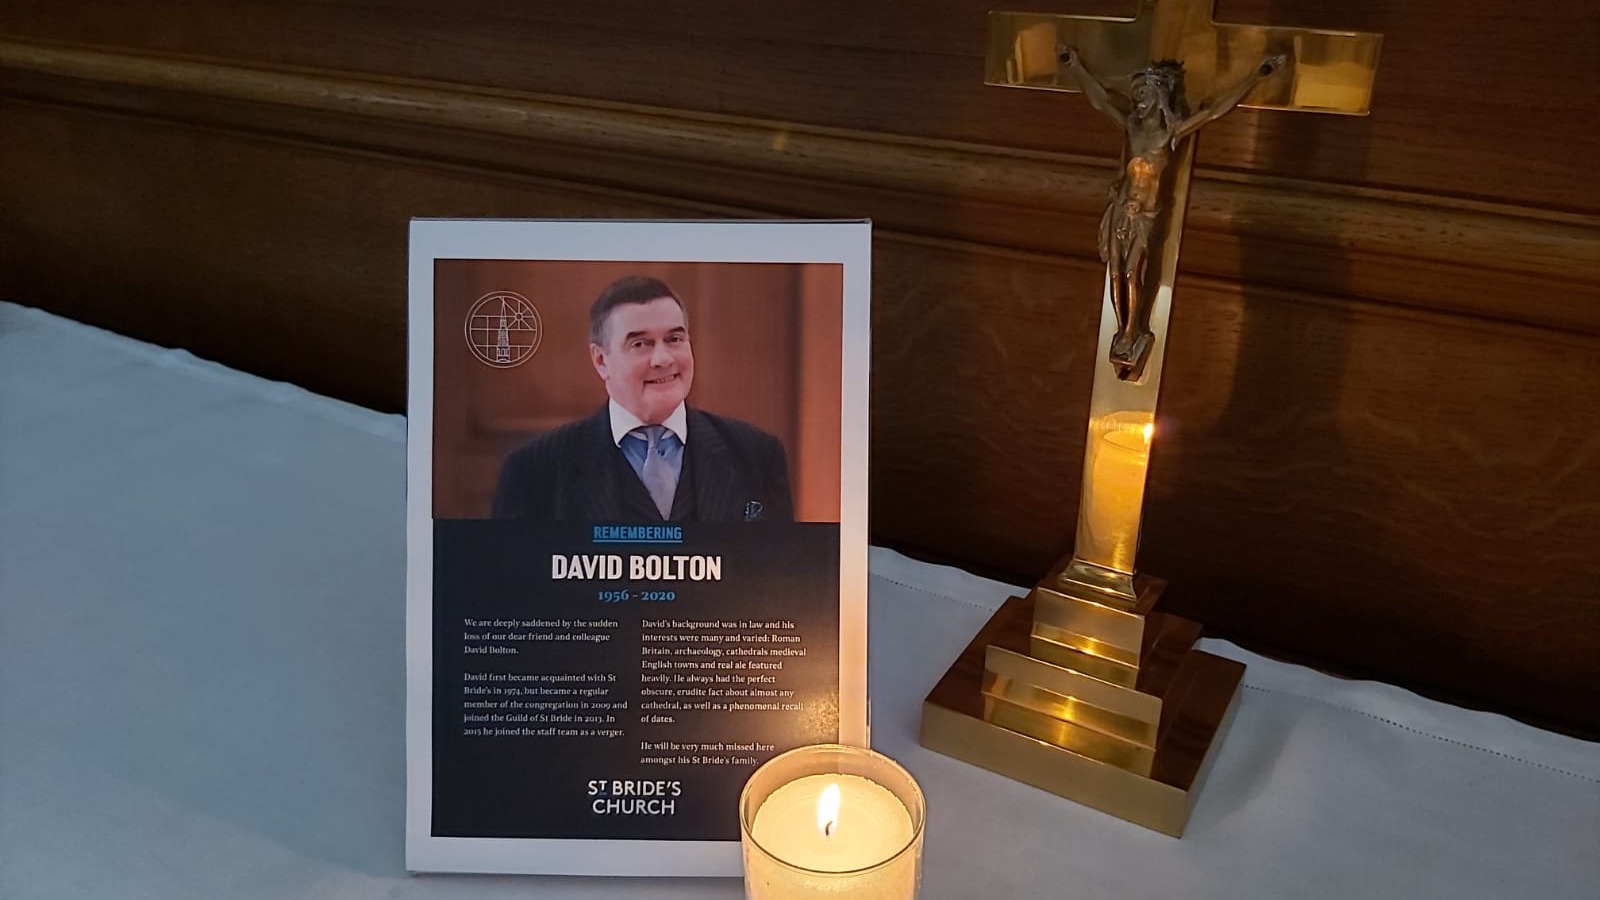 David Bolton remembered on our altar